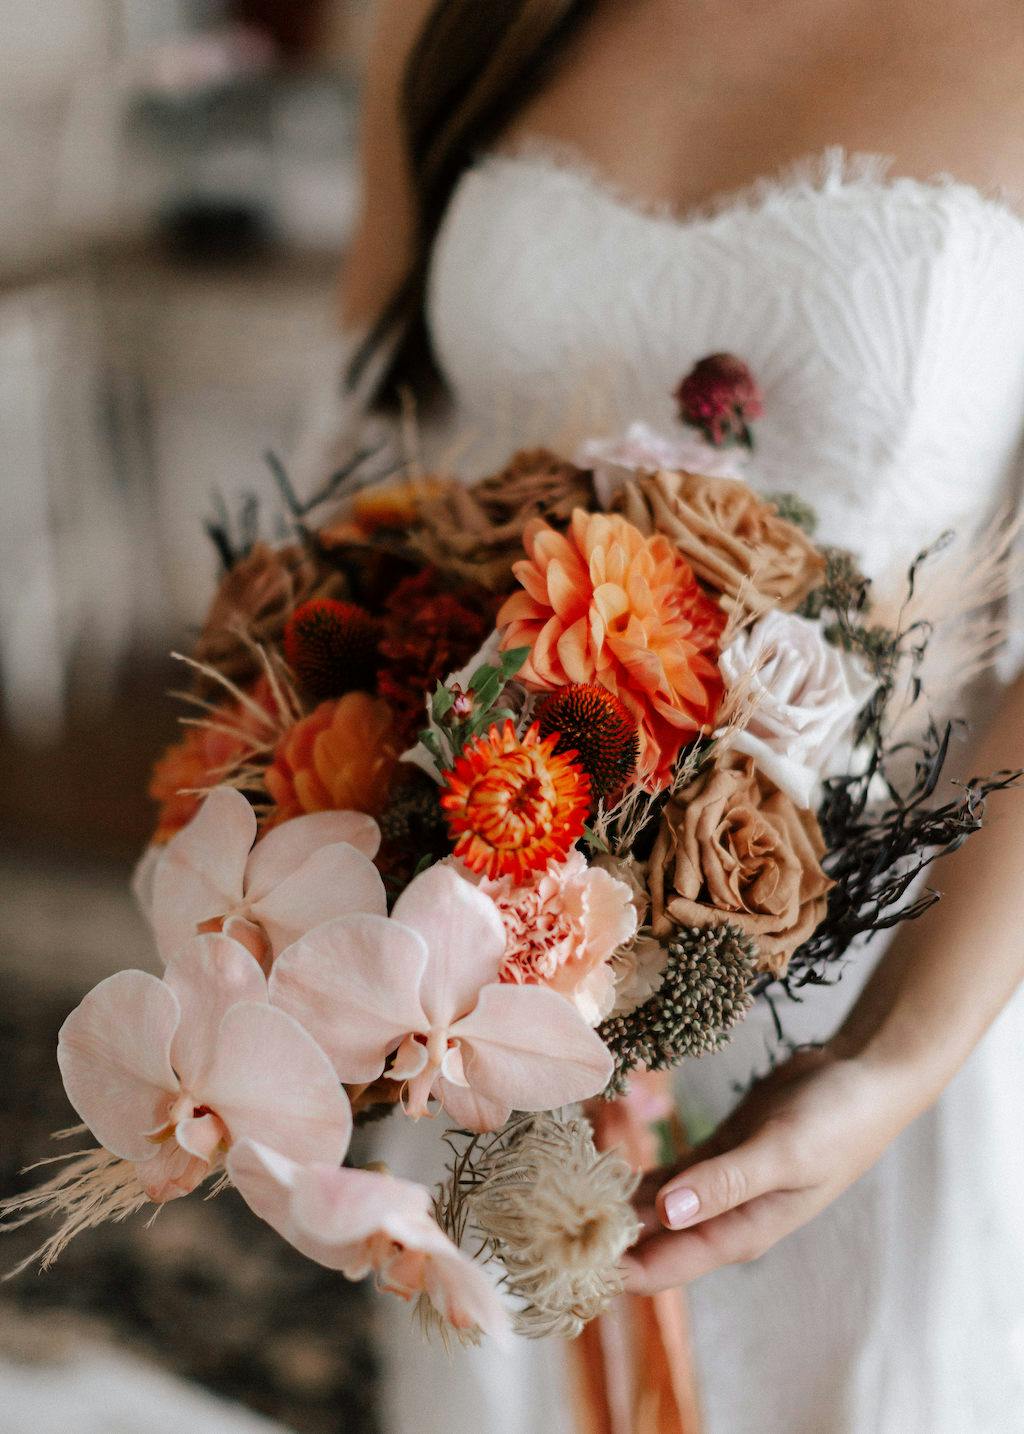 A bride wearing a strapless white dress holds a colorful bouquet featuring pink orchids, orange dahlias, and various other flowers with a mix of greenery and dried elements. The background is softly blurred, drawing focus to the bouquet.